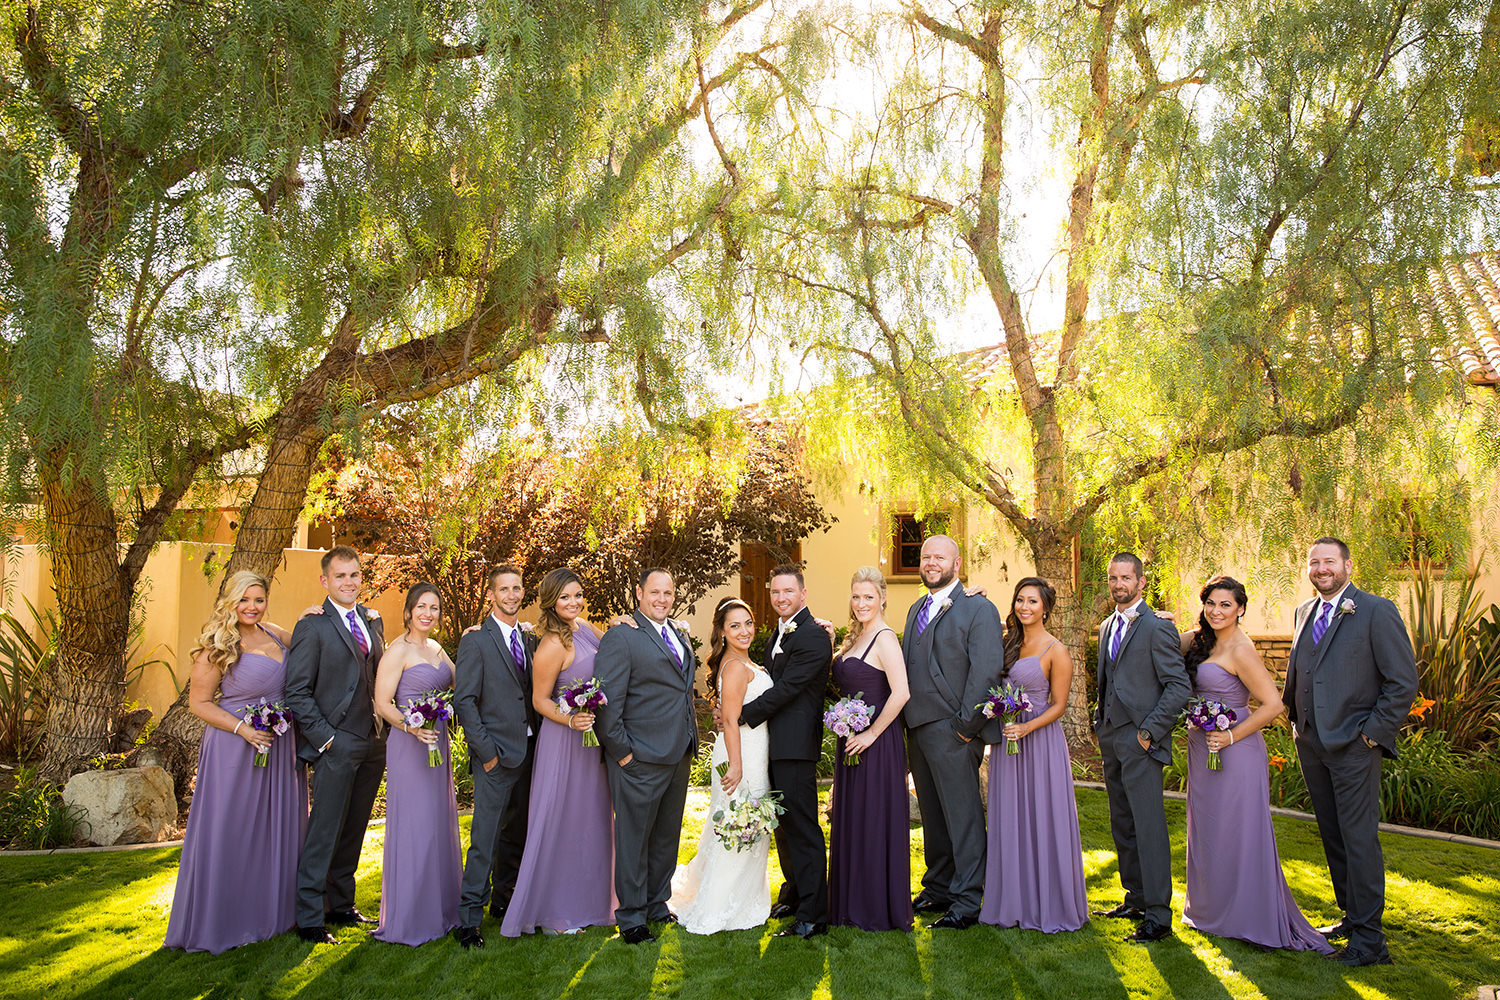 lilac and purple bridesmaids dress and bridal party